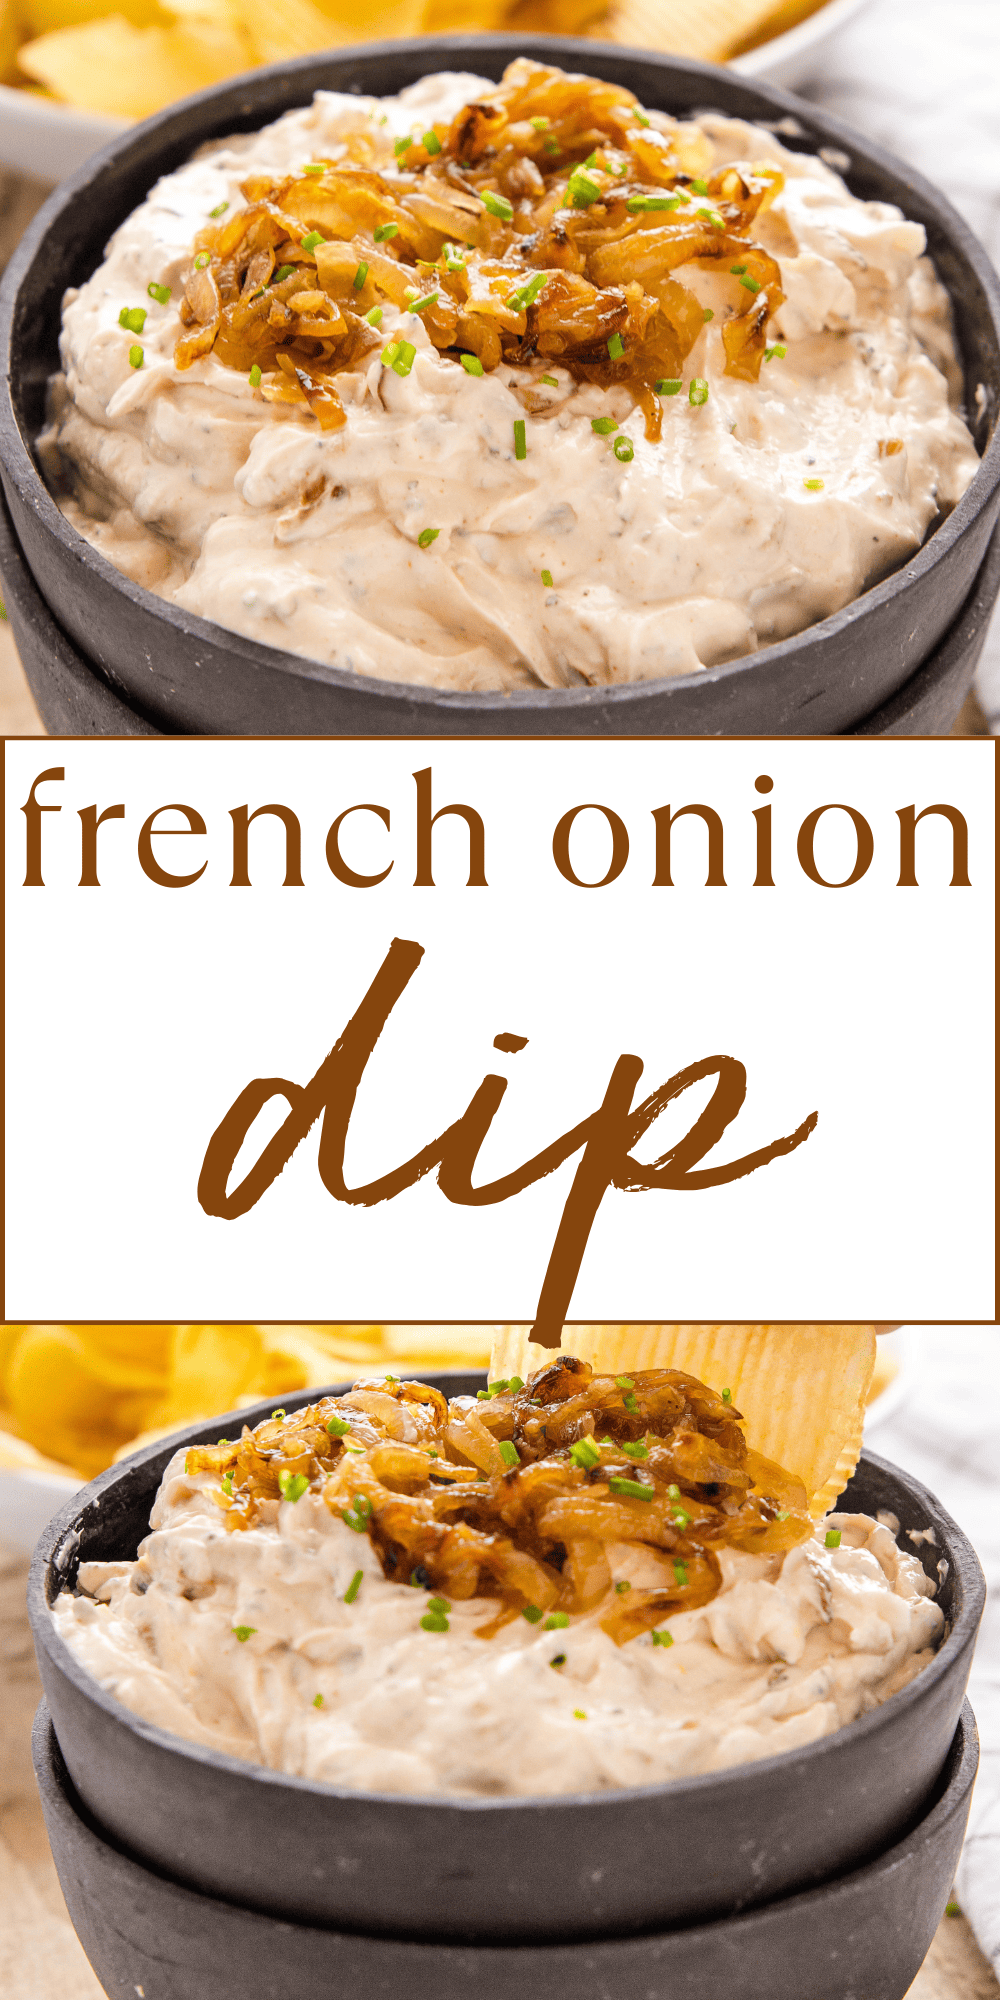 This French Onion Dip recipe is the perfect party dip. A creamy caramelized onion dip for serving with chips or cut veggies - an easy homemade appetizer! Recipe from thebusybaker.ca! #appetizer #frenchoniondip #caramelizedoniondip #oniondip #easydiprecipe #homemadedip #partyfood #partyappetizer #chipsanddip via @busybakerblog